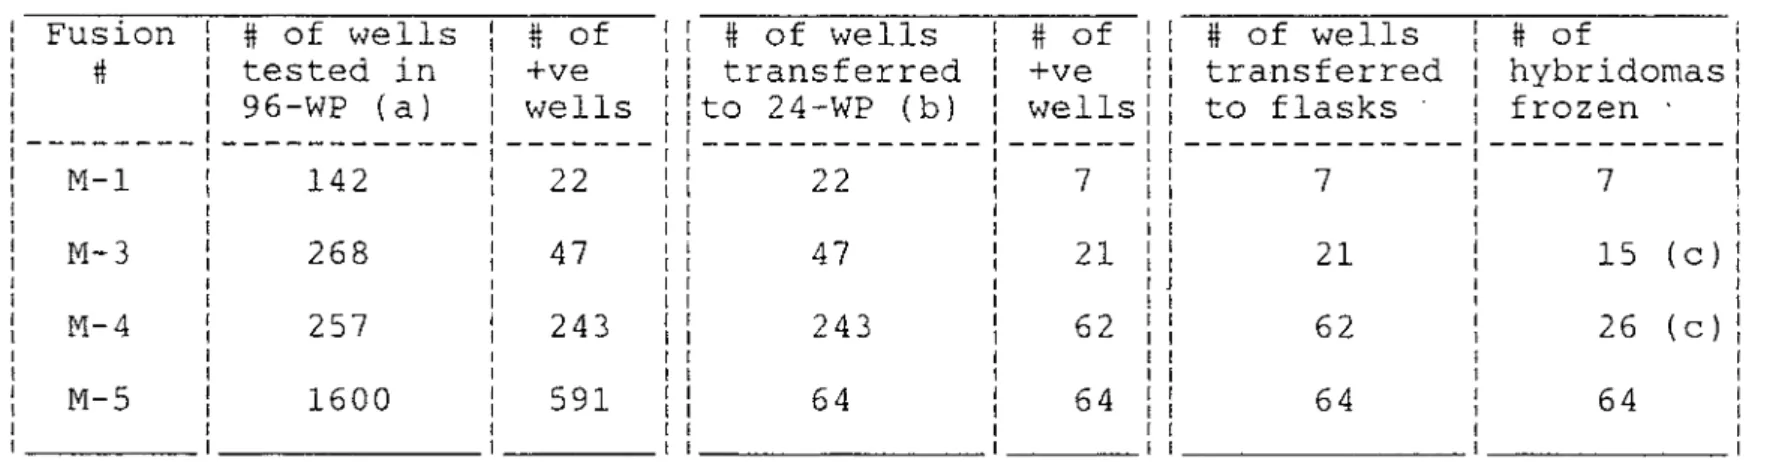 TABLE 2. CMV-specific hybridoma from the different fusions performed. Fusion # # of wells | tested in ] 96-WP (a)  ! _  ! # of+ve wells M-l 